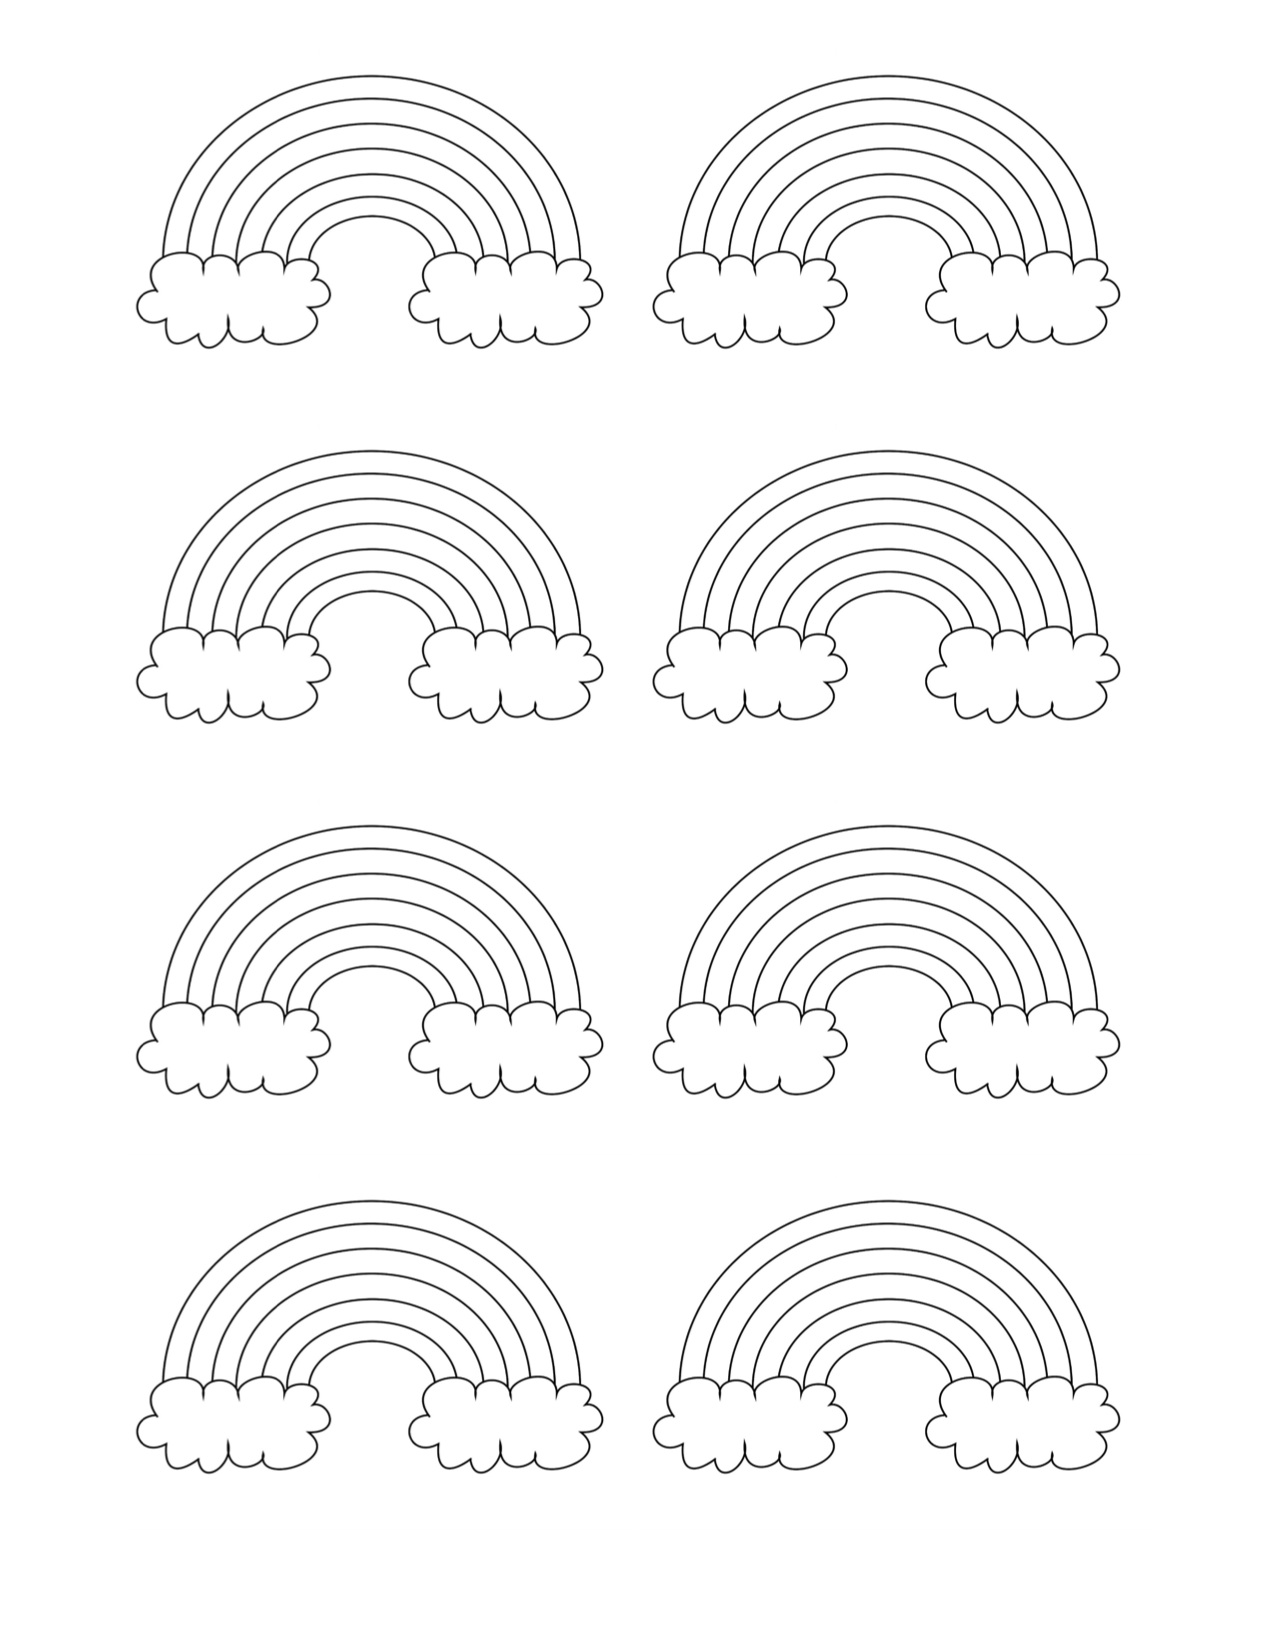 Cute Rainbow Patterns with Clouds - Free Template You Can Print! - What